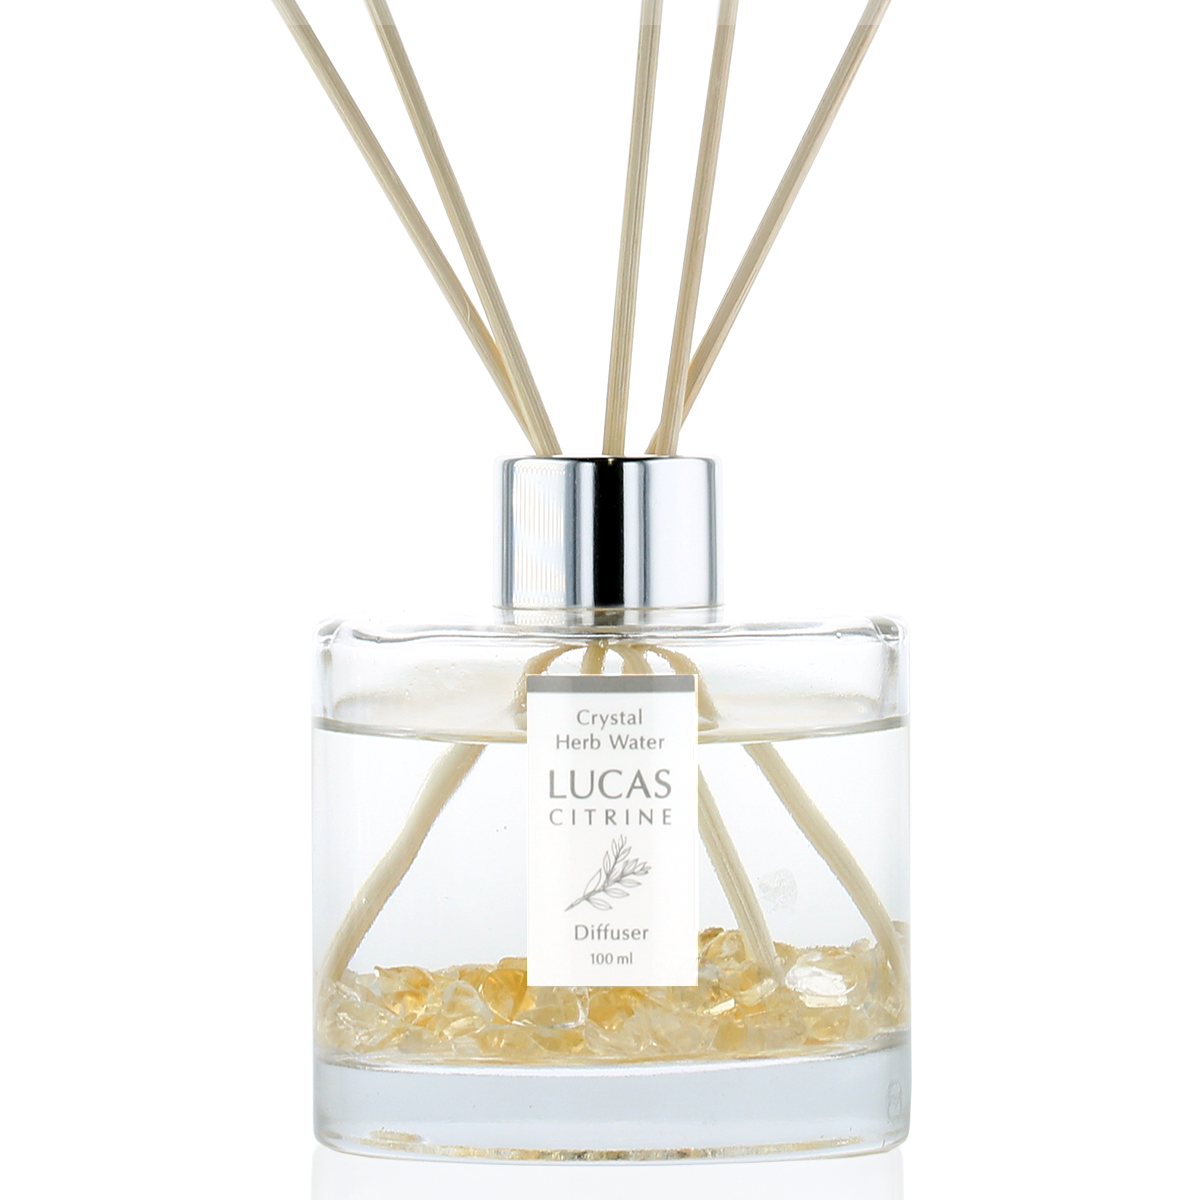 Purifying diffuser LUCAS [100% natural ingredients, CITRINE]